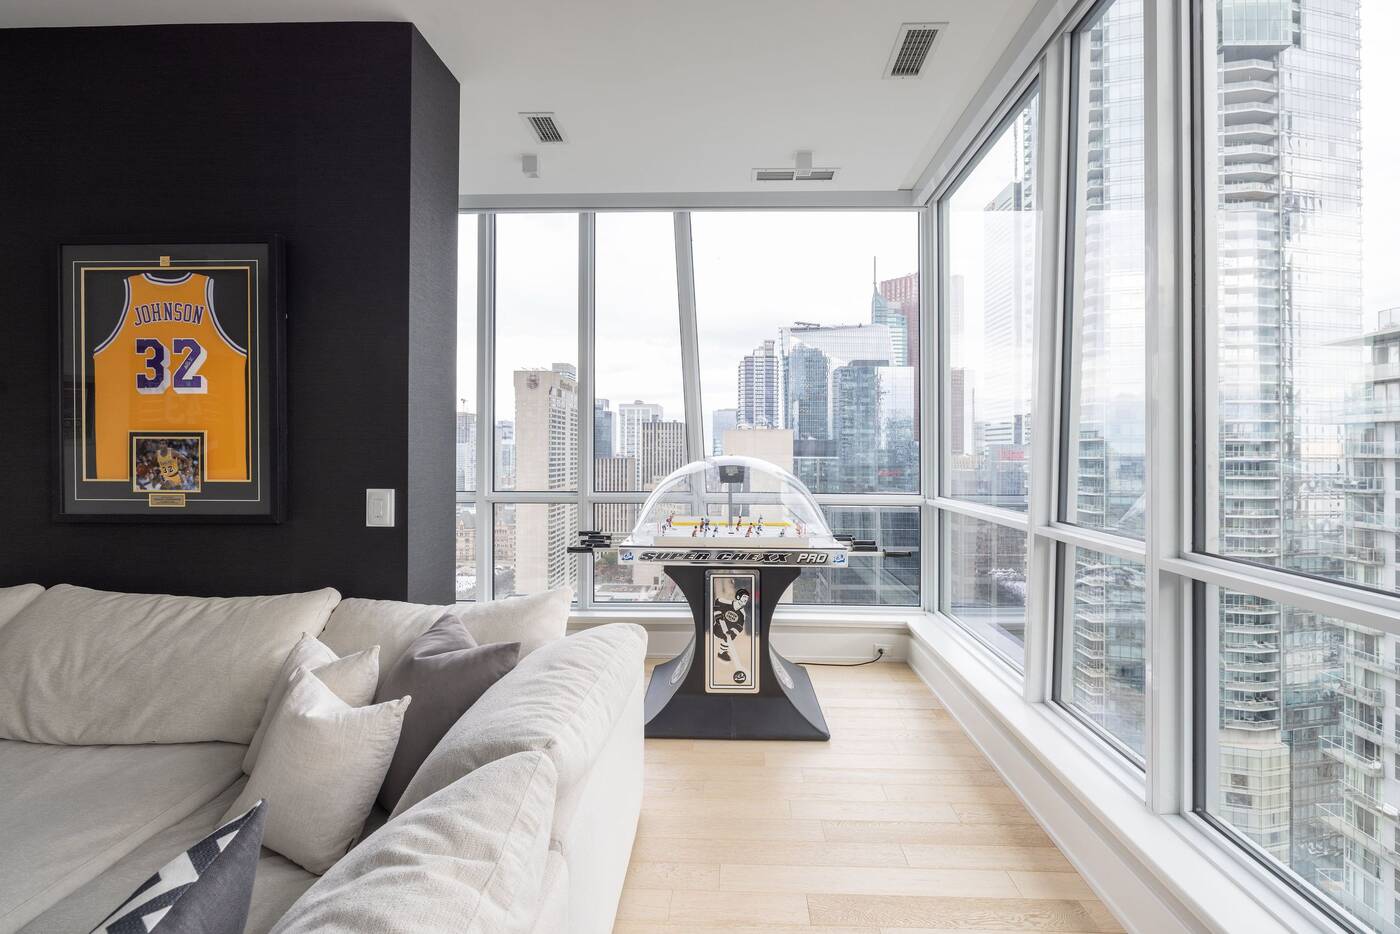 Nazem Kadri drops asking price for Toronto penthouse by almost $1M